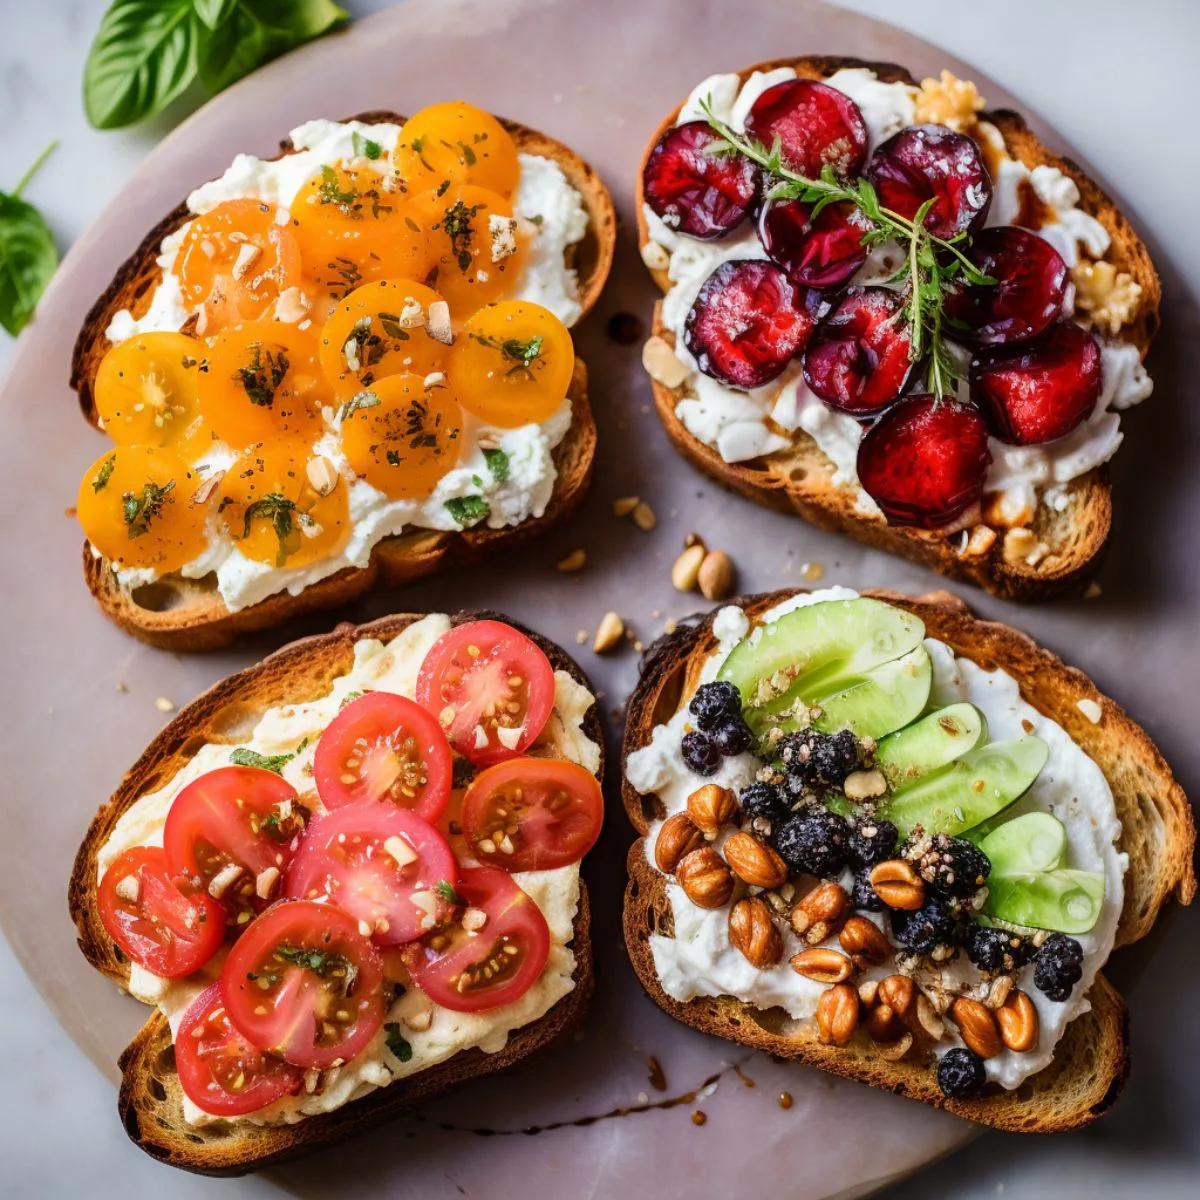 Plate of 4 cottage cheese toasts with various toppings